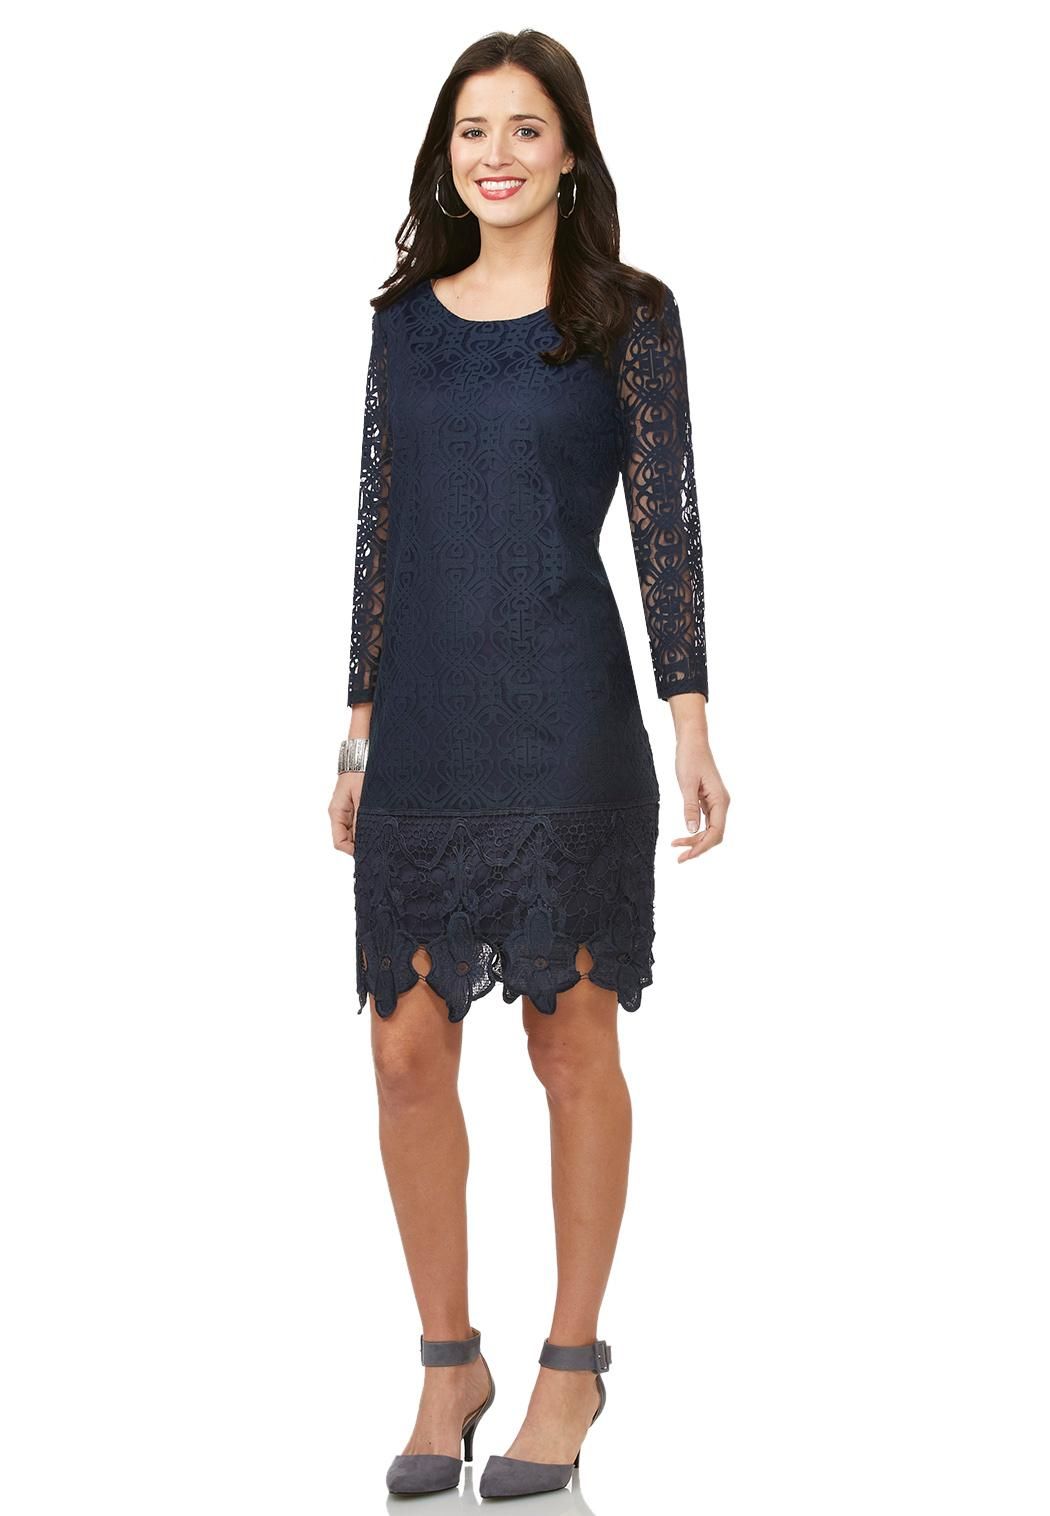 Scalloped Lace Dresses Collection